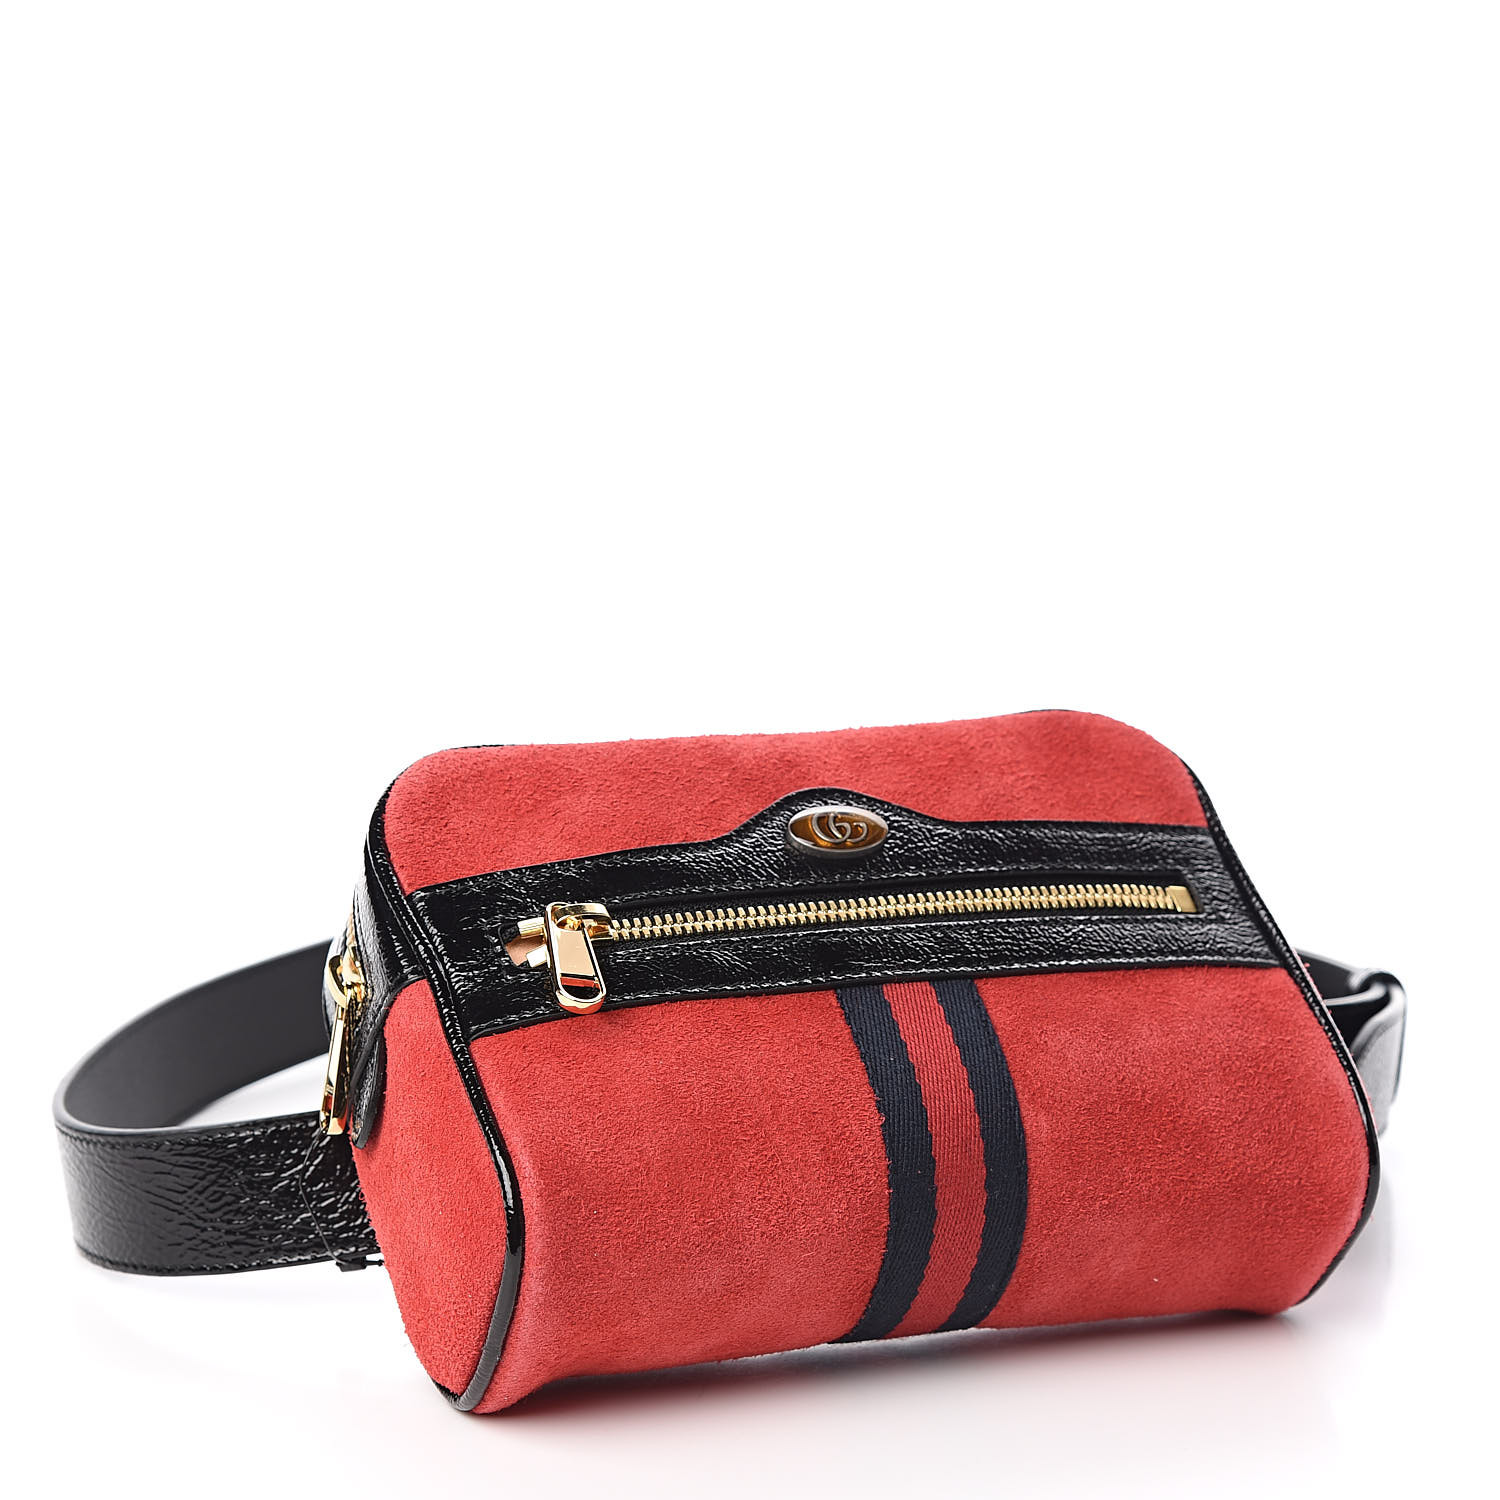 GUCCI Suede Small Ophidia Belt Bag 85 34 Hibiscus Red 527552